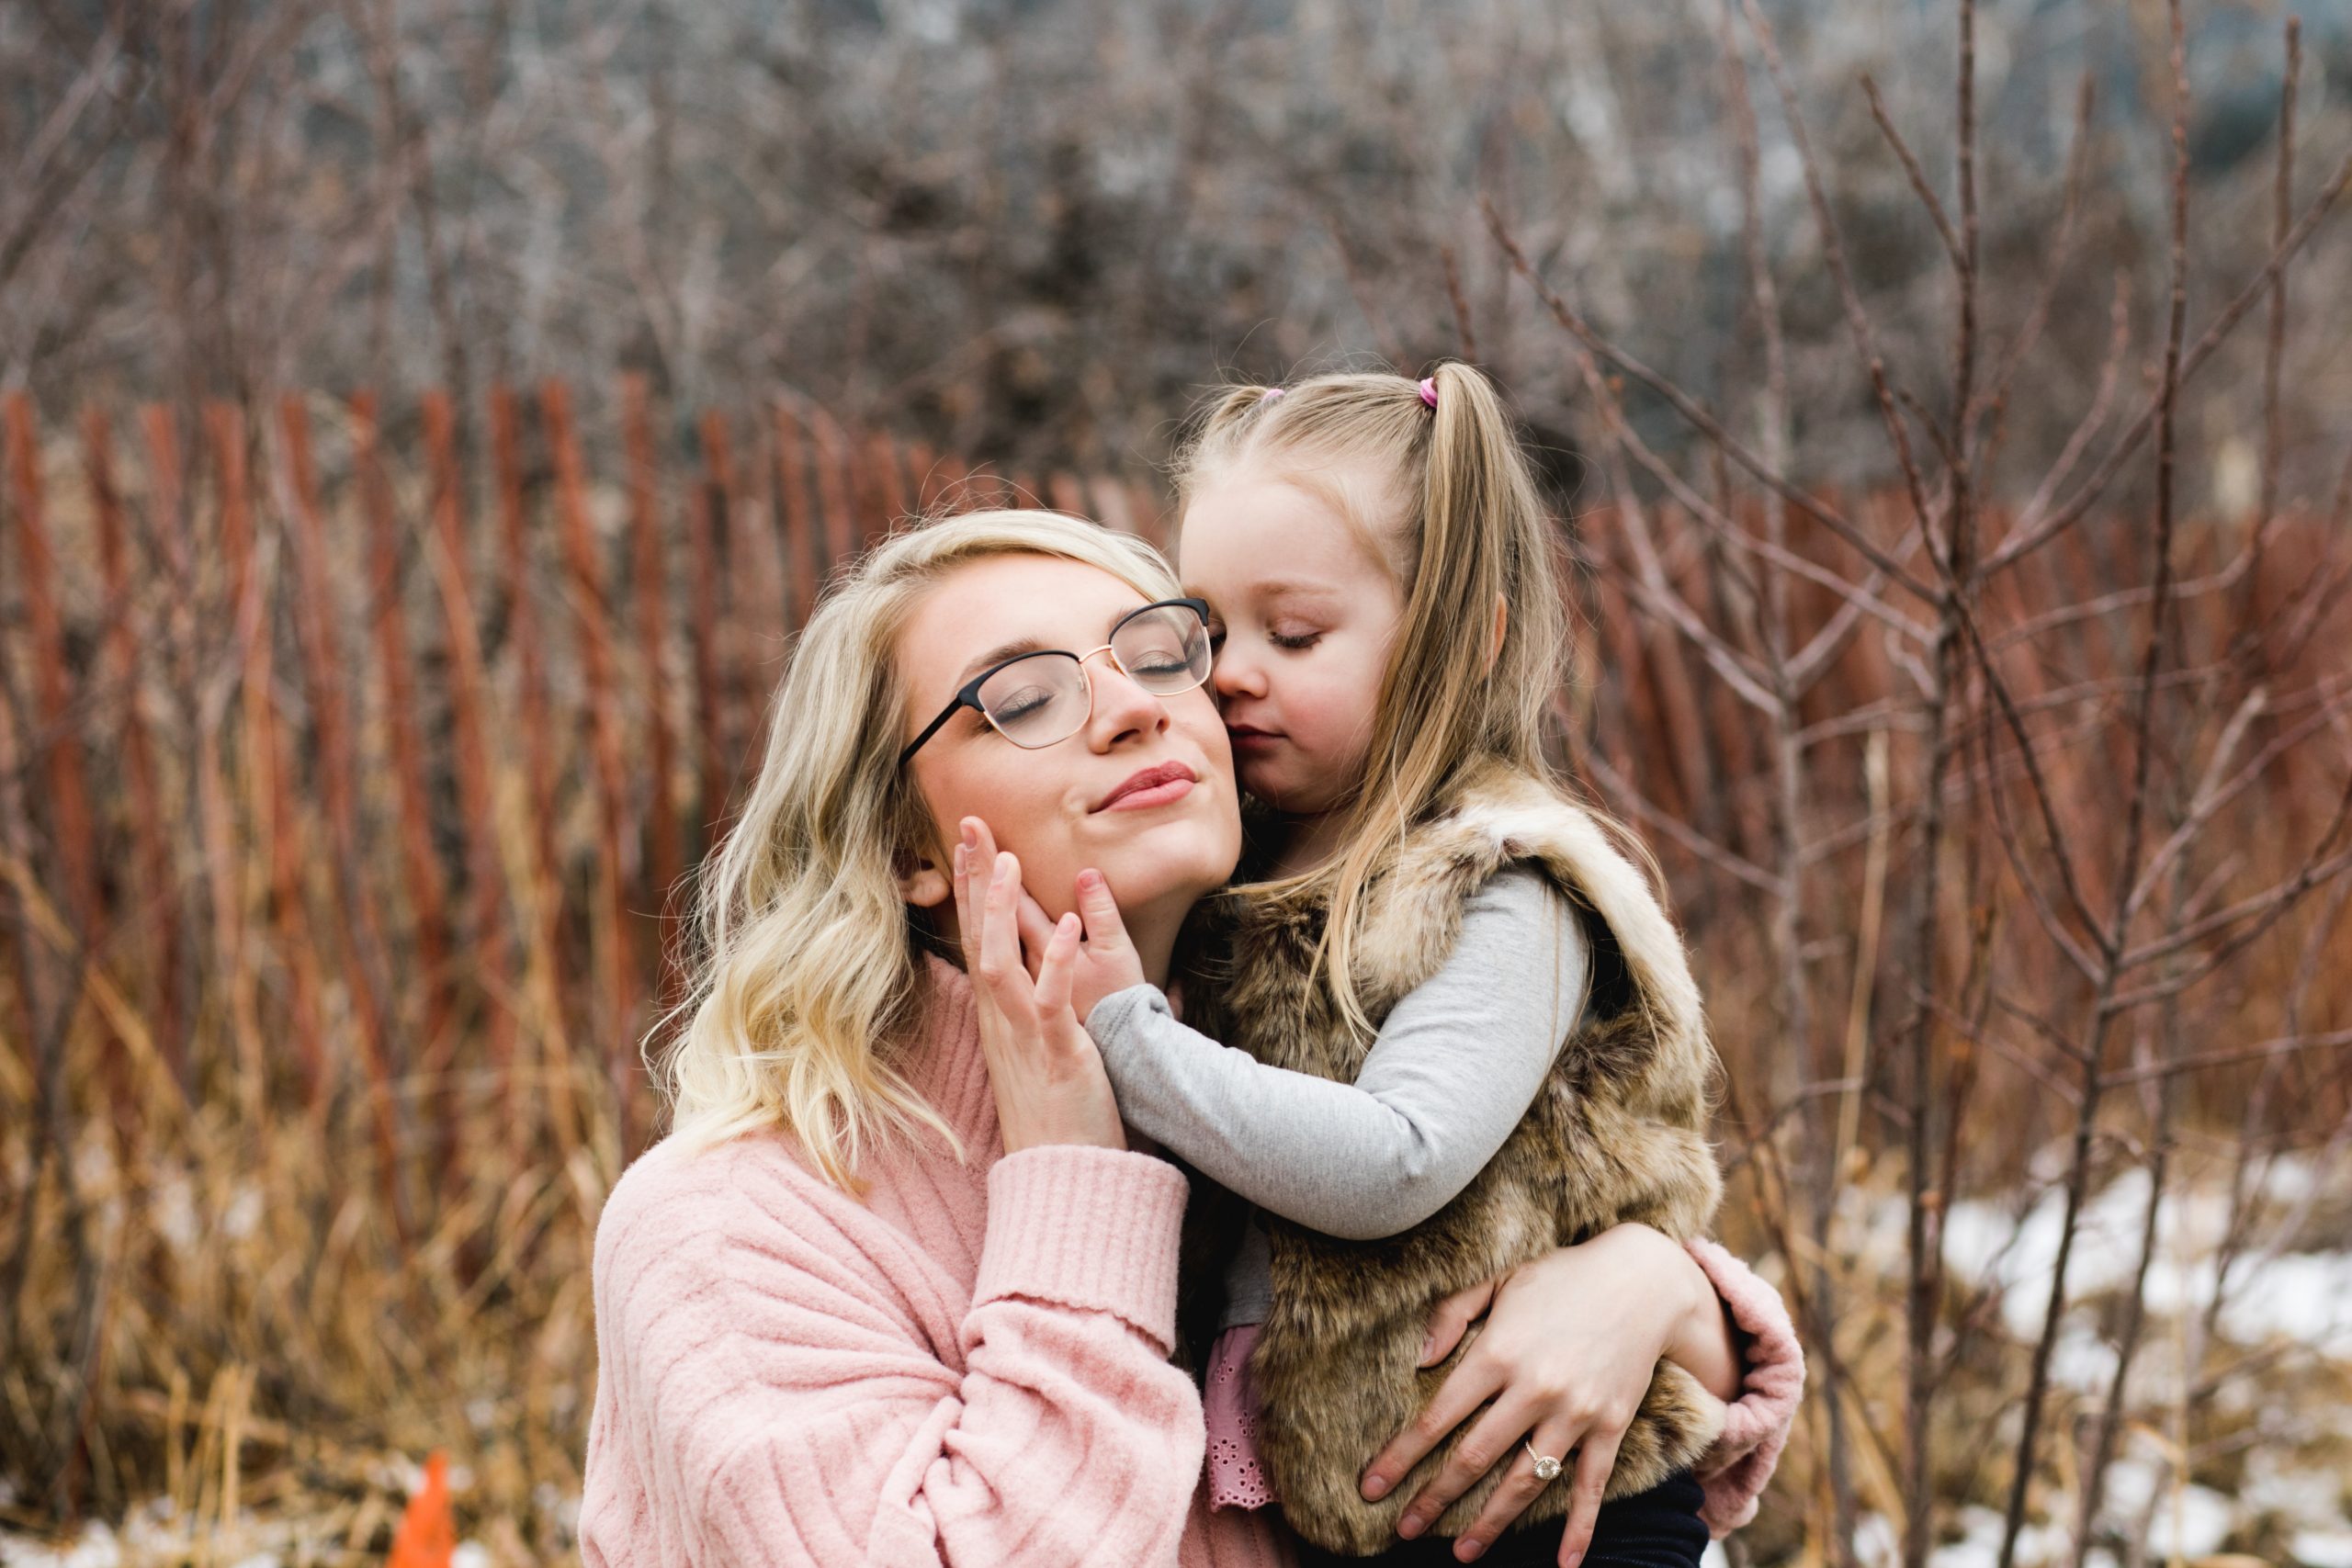 Daughter snuggles into her mama's face during an outdoor winter photo session